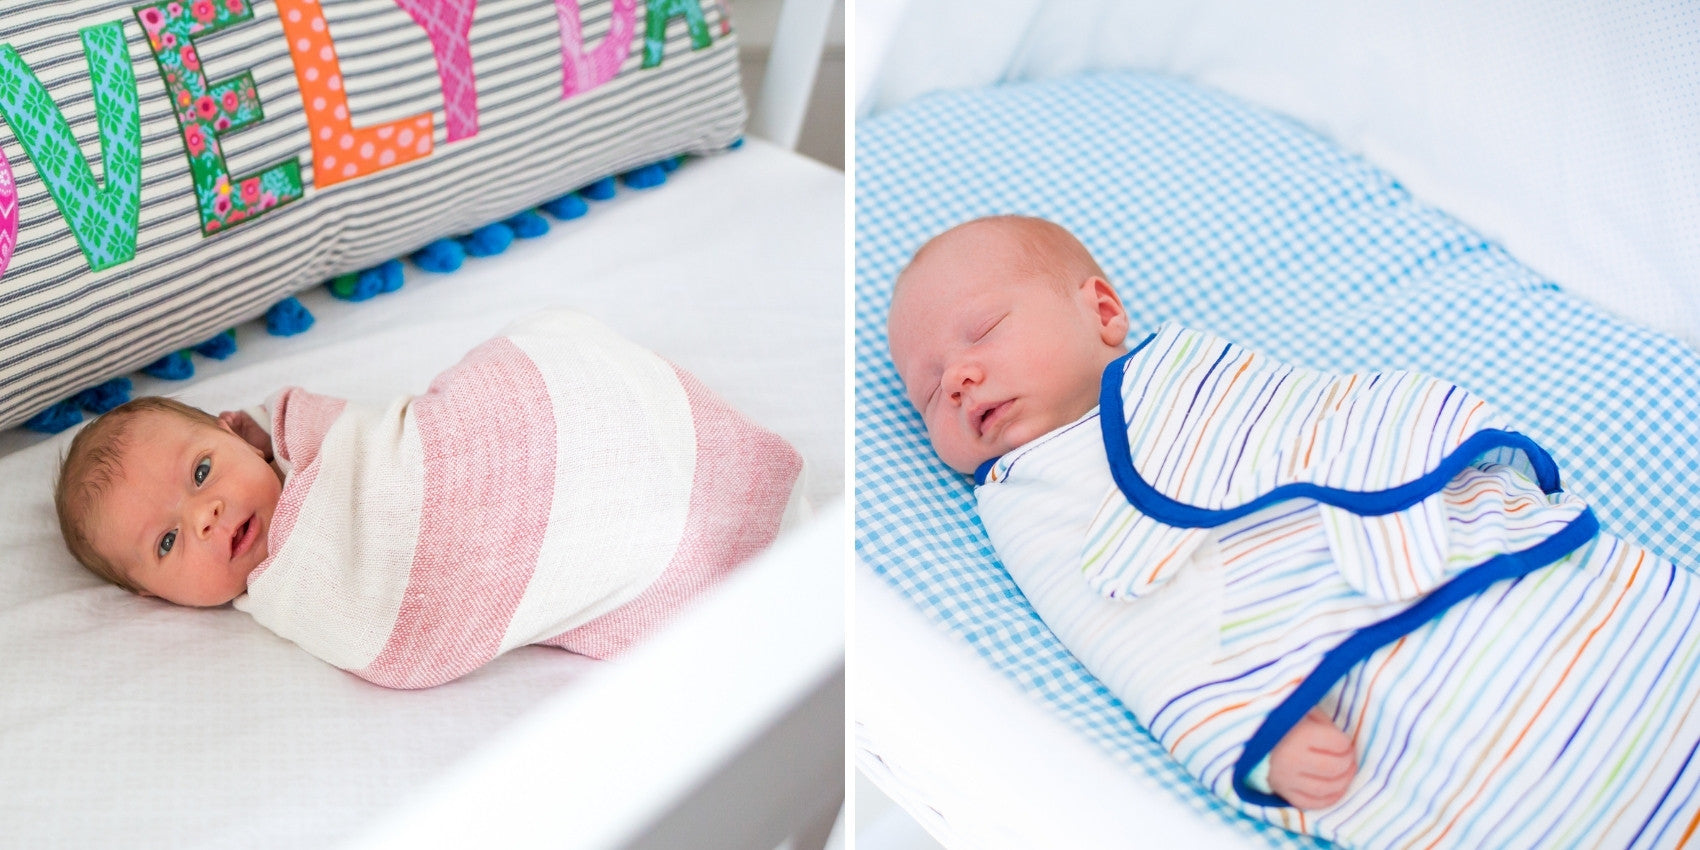 Split image of babies wrapped in swaddles. The baby on the left is wrapped in a traditional swaddle blanket and the baby on the right is wrapped in a 2-in-1 swaddle